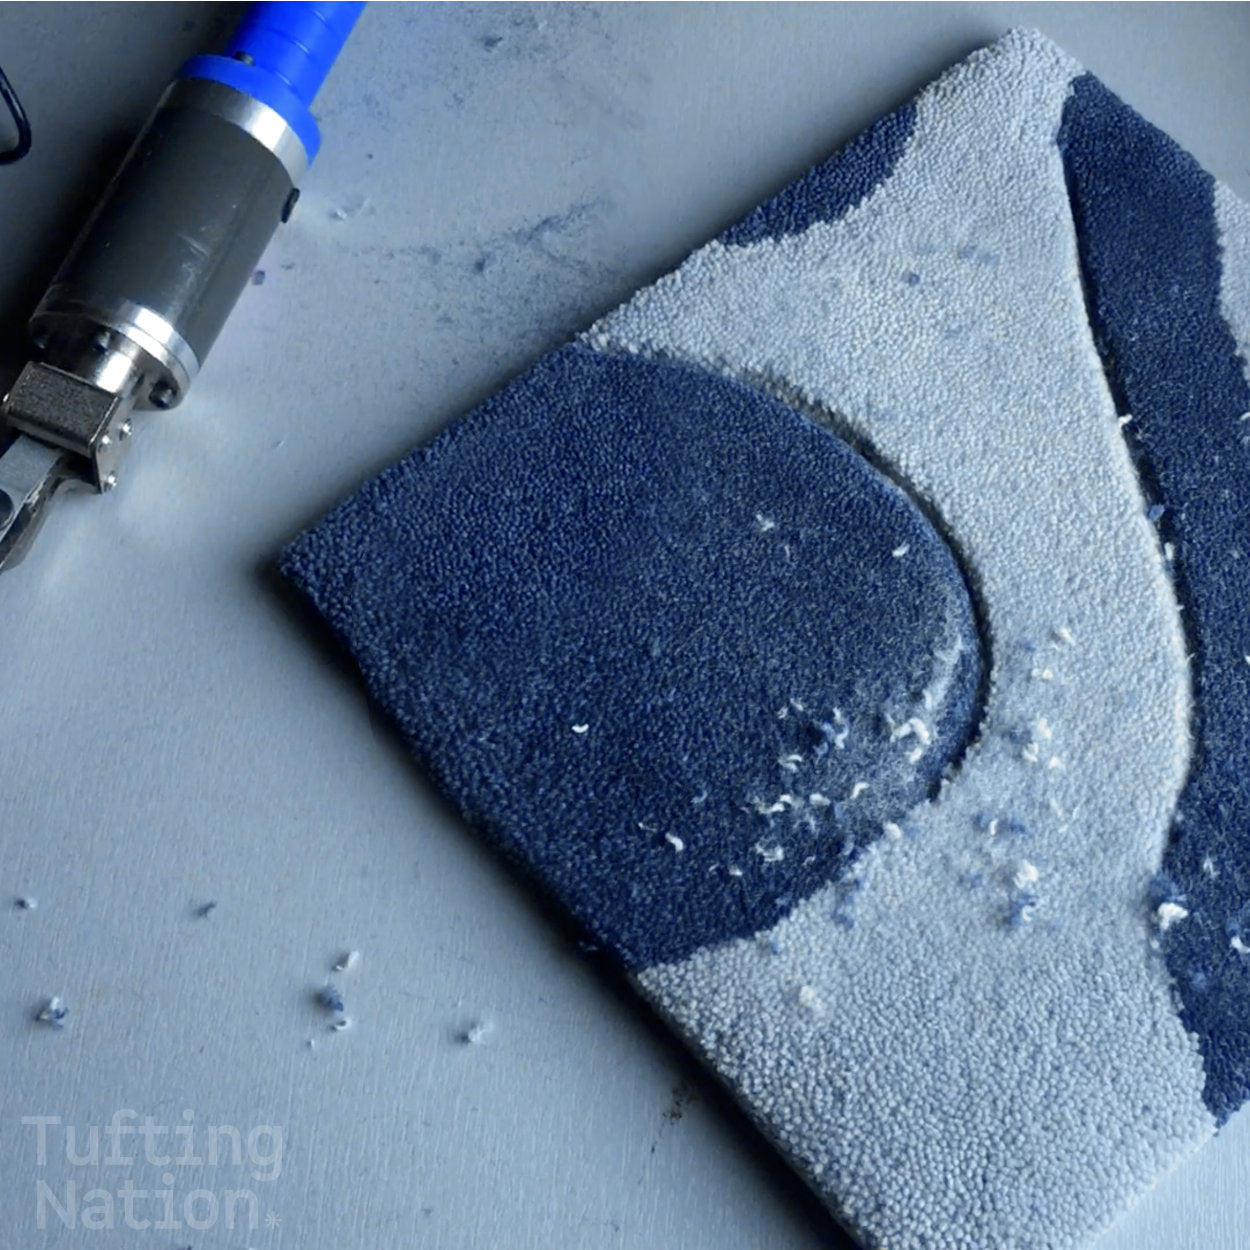 Tufted Rug Sculpted with an electric carving scissors | TuftingNation